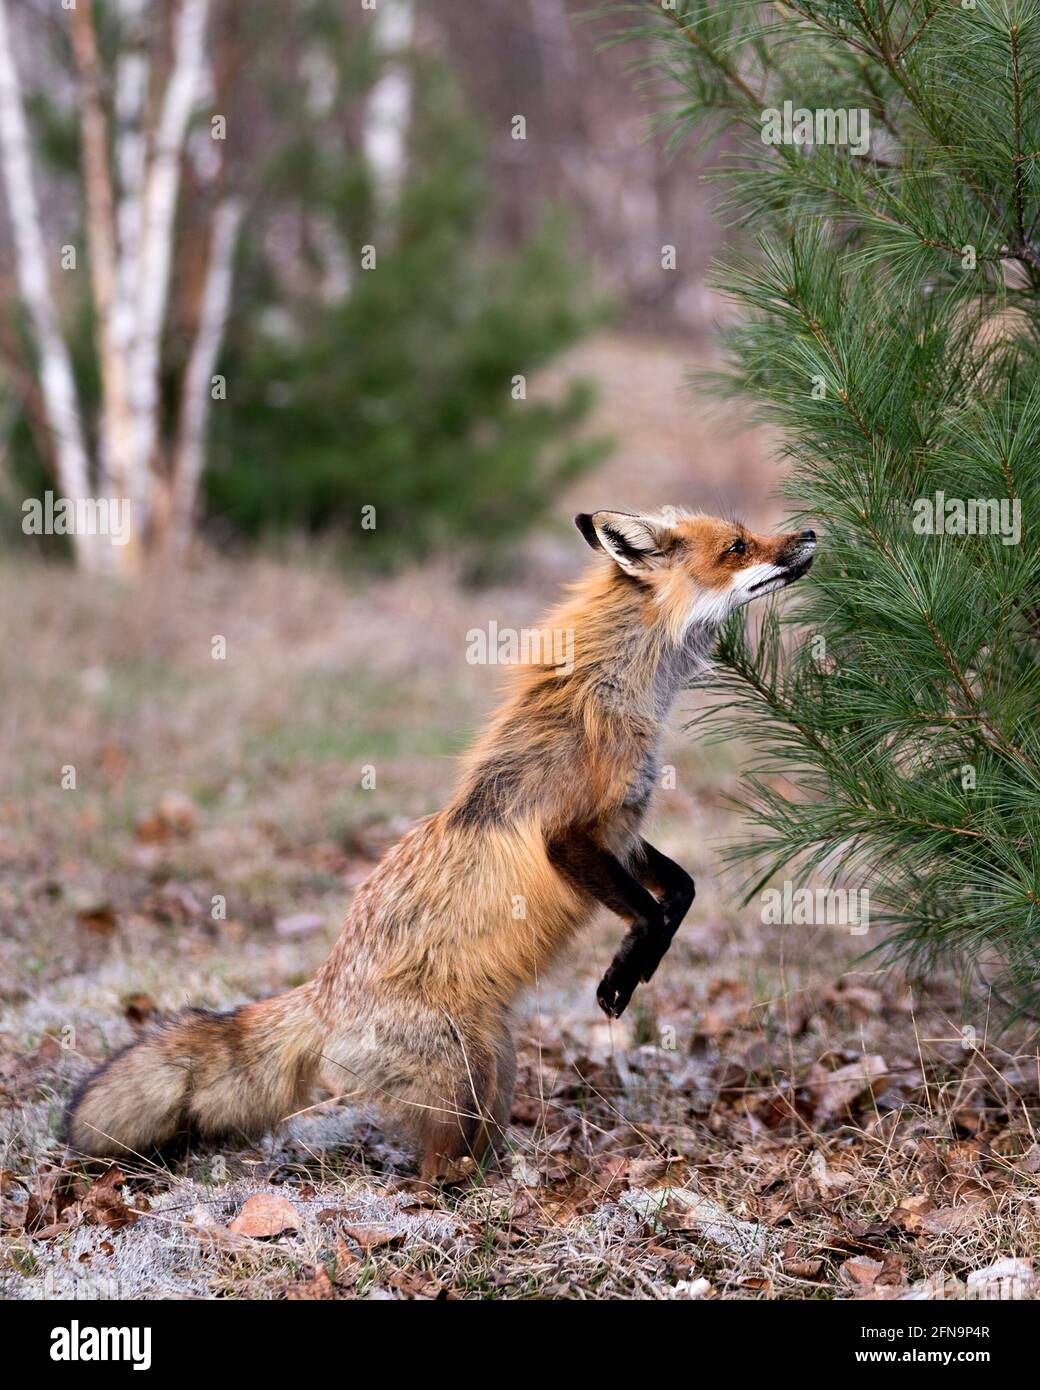 Red Fox standing on back legs and smelling a pine tree needles with blur background in its environment and habitat. Fox Image. Picture. Portrait. Stock Photo